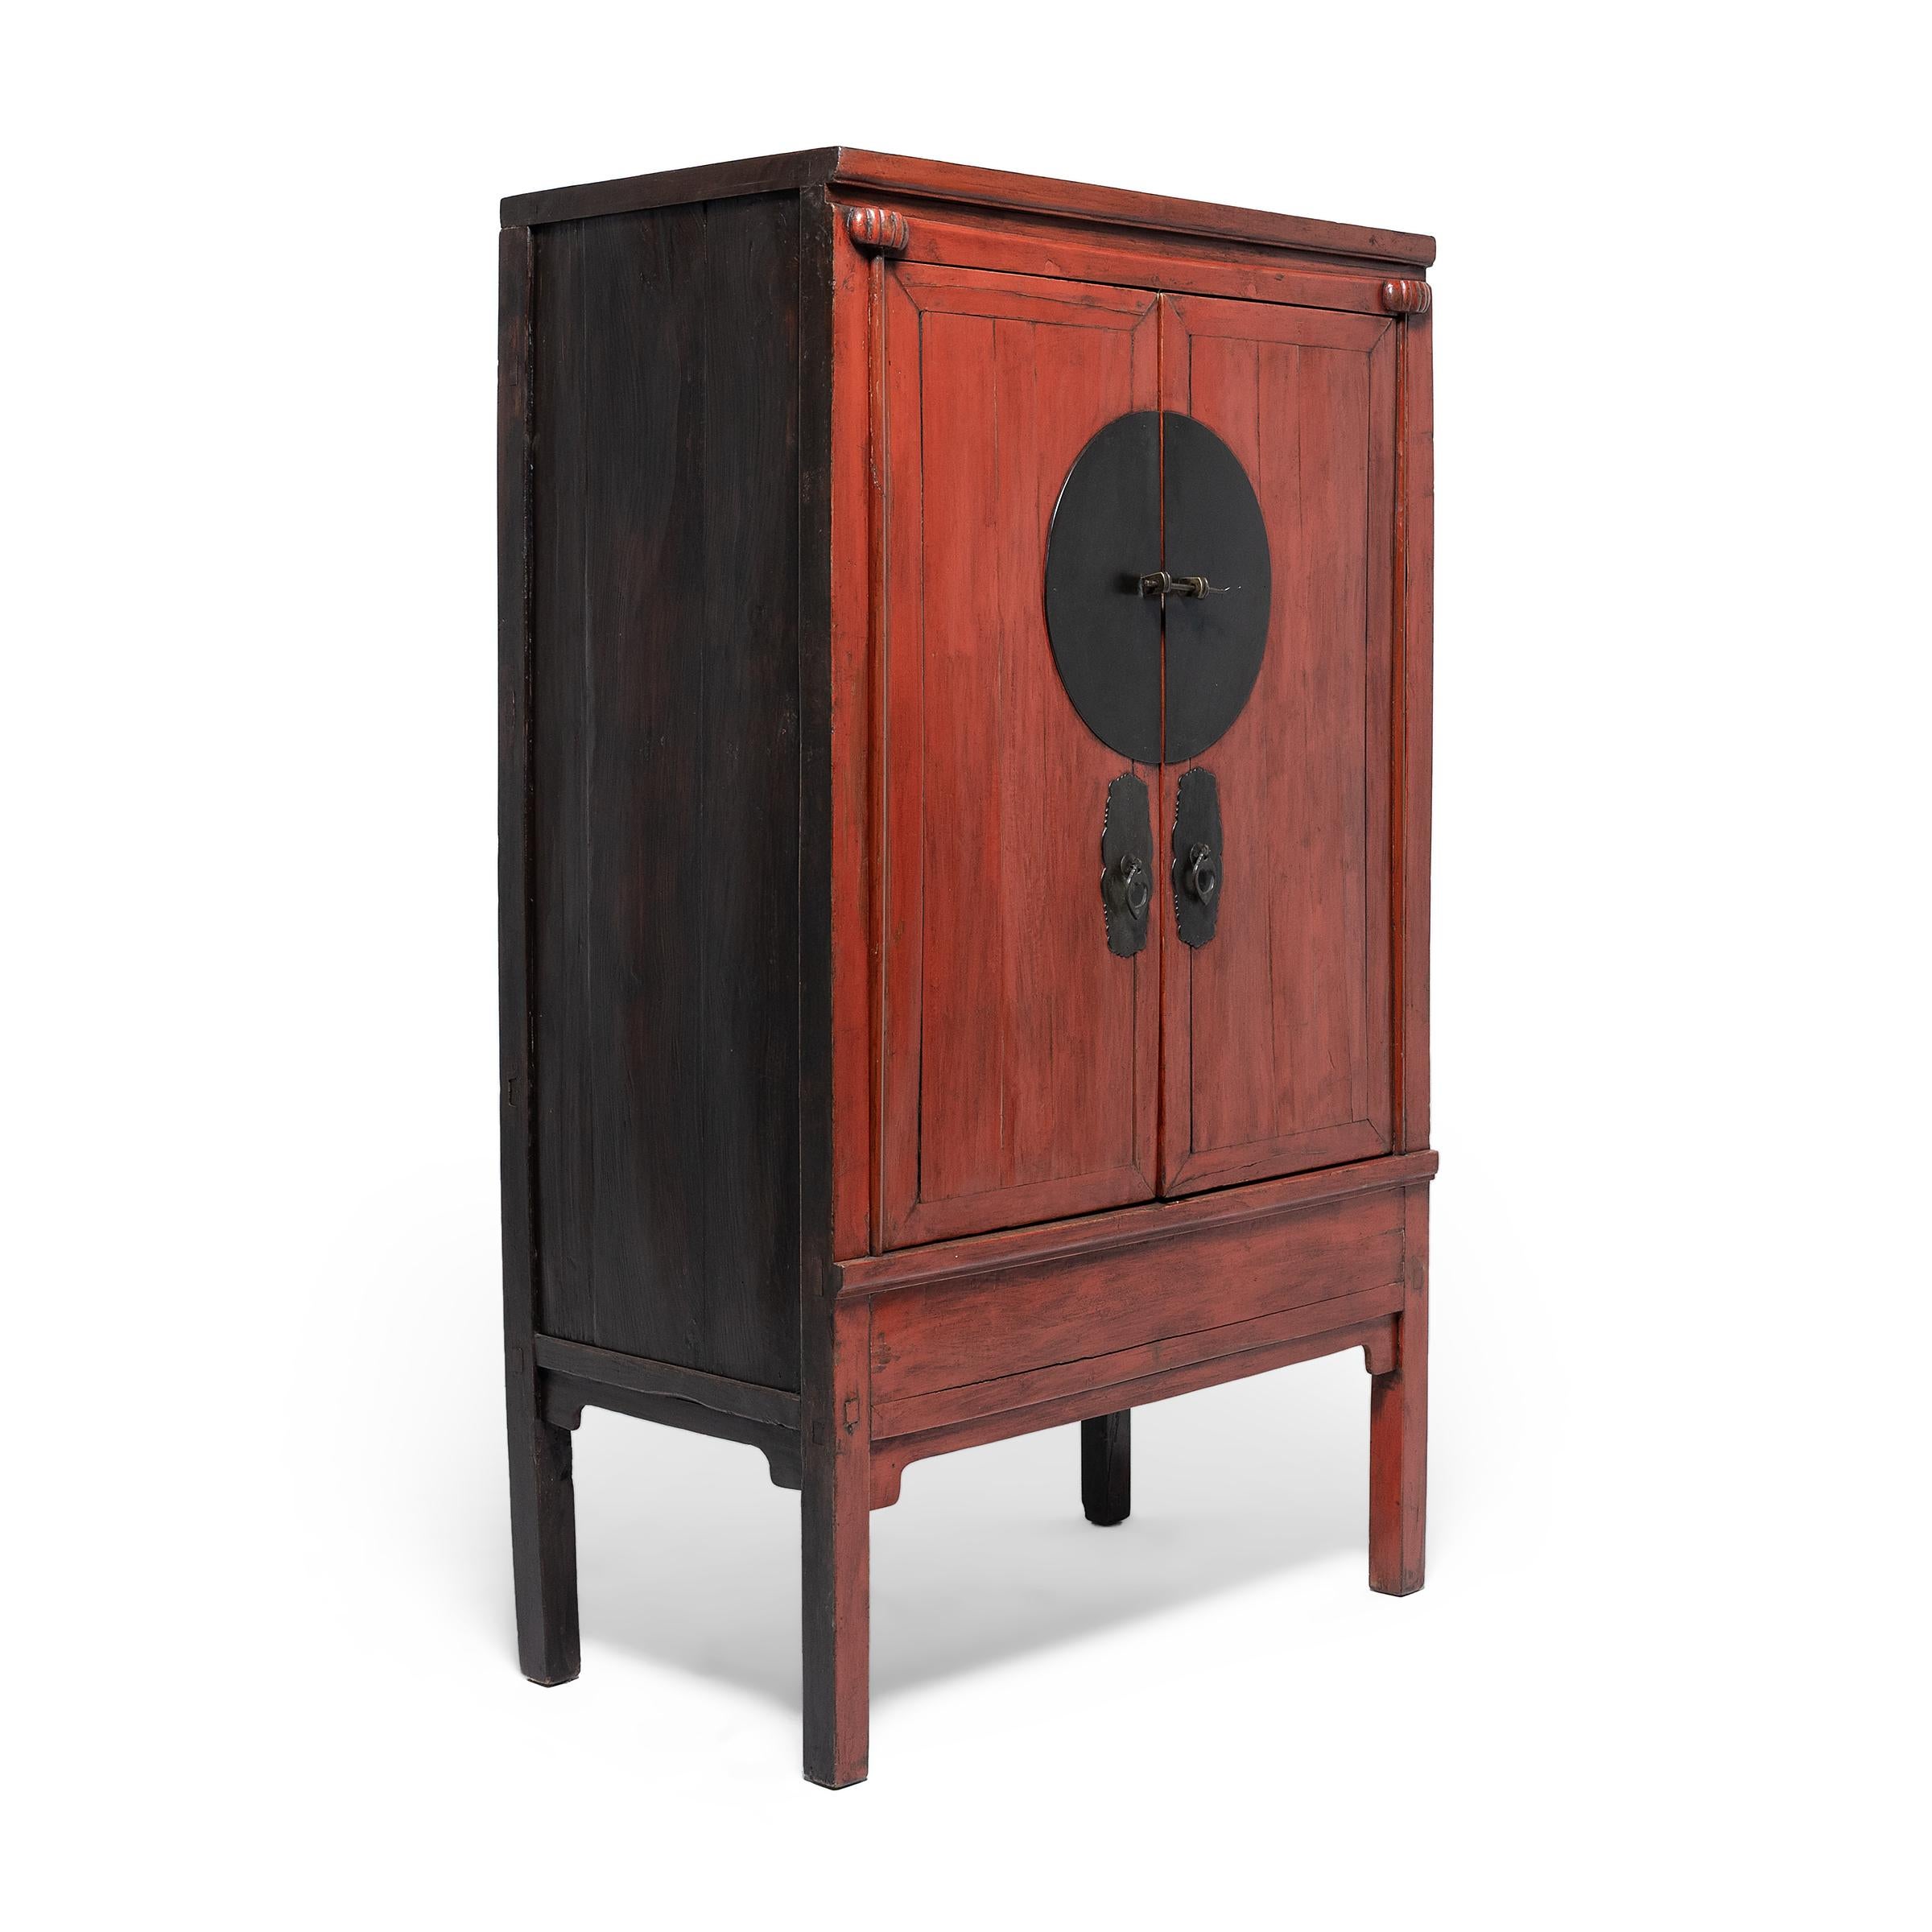 Crafted in the late 19th century, this striking red lacquer cabinet was likely part of a traditional wedding dowry, bestowed upon the groom by the bride's family filled with fine silks, linens, and other gifts. The tall cabinet has a clean-lined